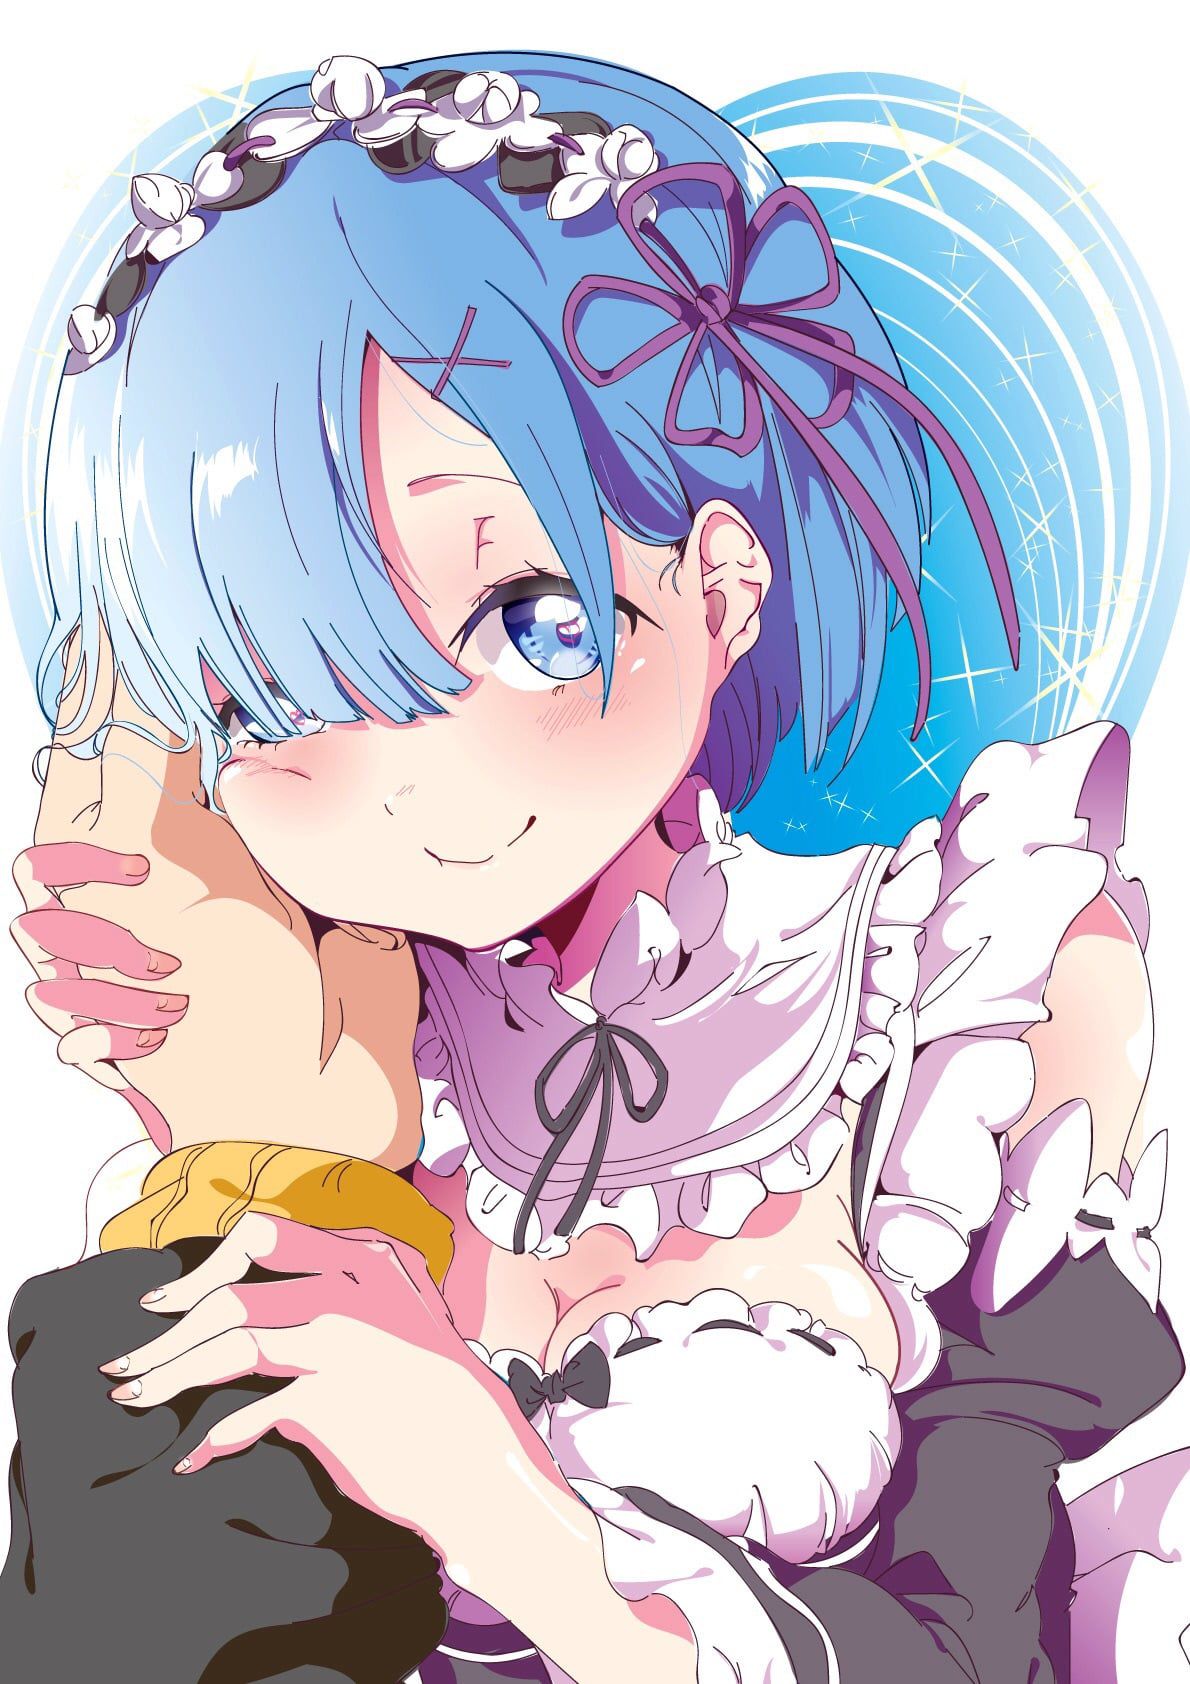 [Rezero] Re: MoE different world life starting from scratch images part 1 9